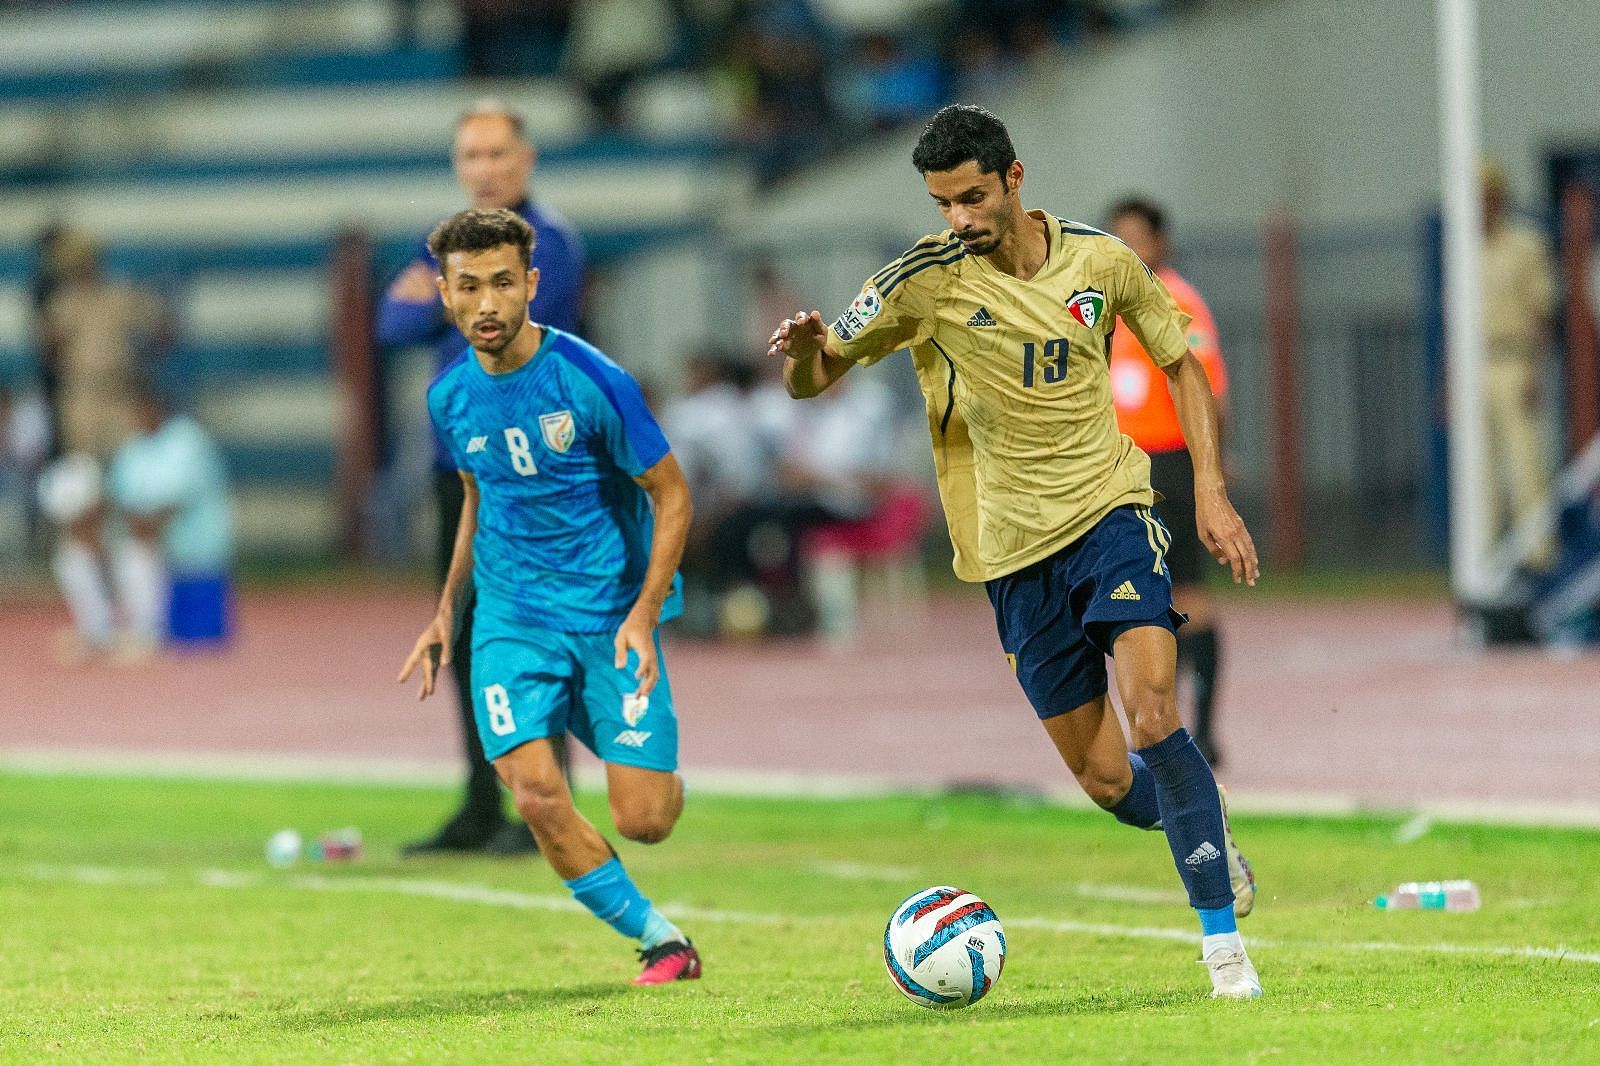 Mahesh has been a bright spark for the National Team (Image courtesy: AIFF Media)